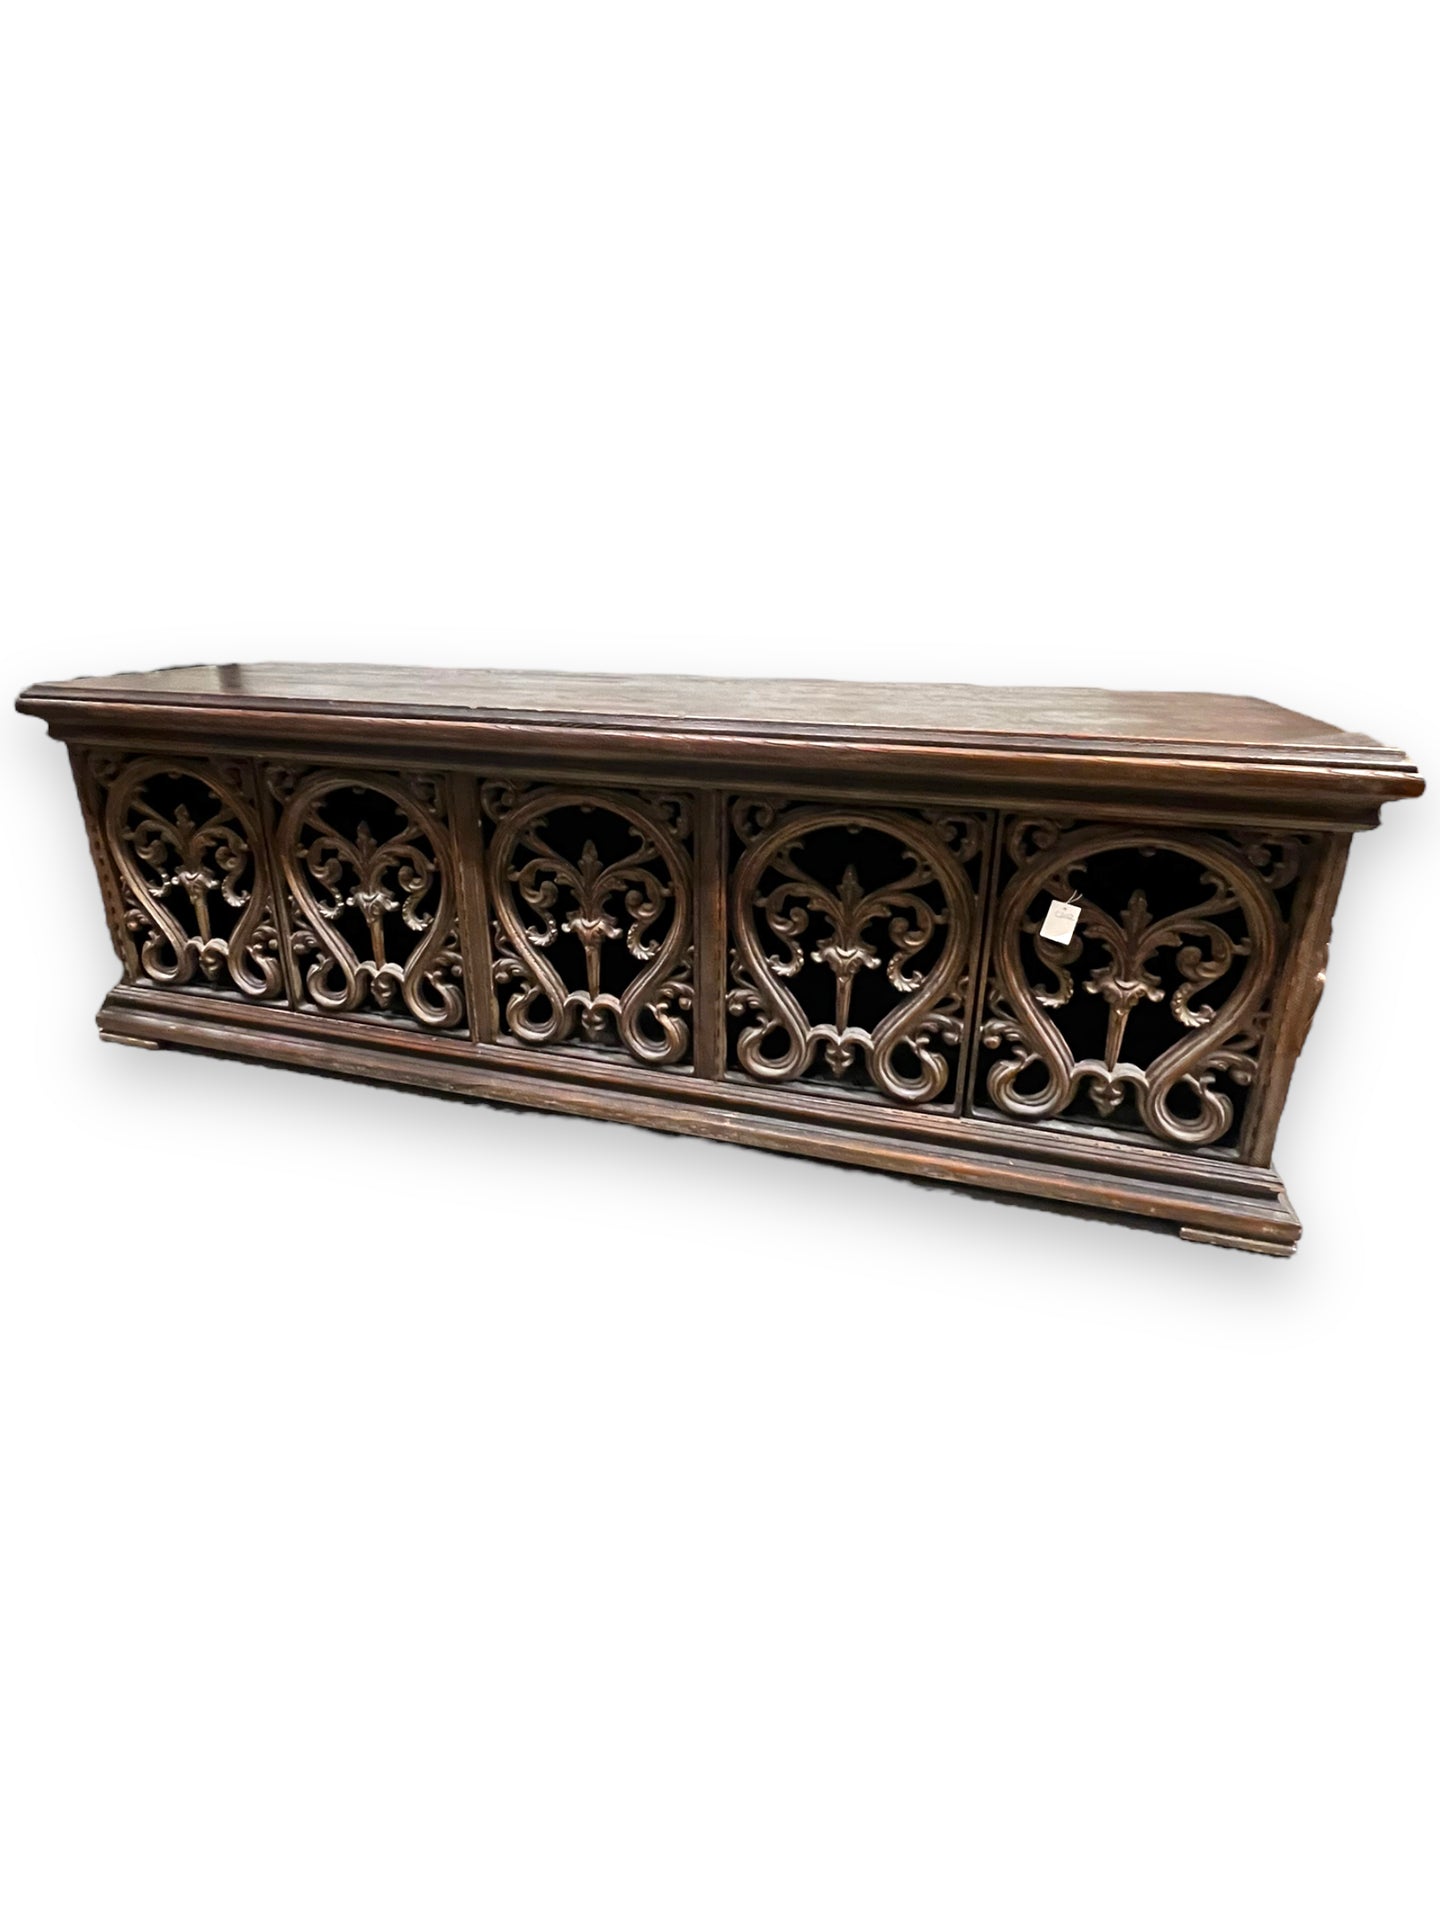 Wood Bench with Metal Filigree Doors for Storage - DeFrenS